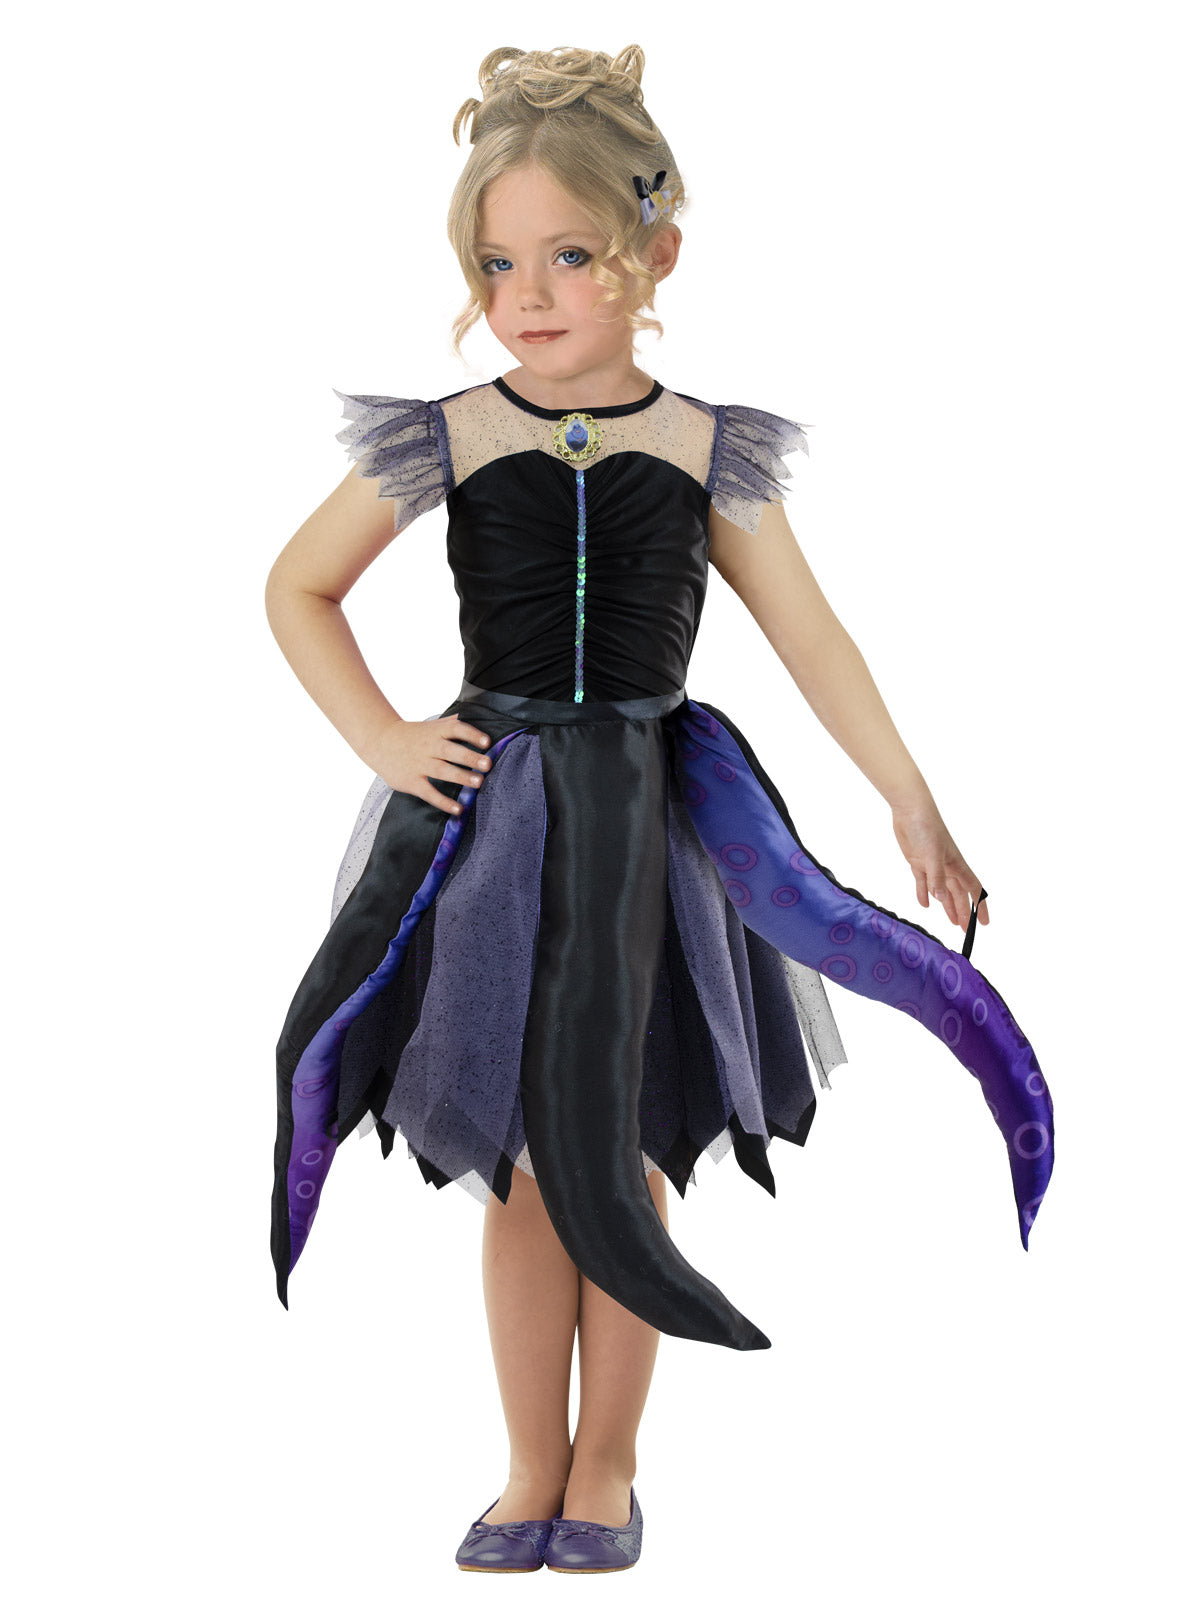 Ursula Sea Withc Little Mermaid Child Girls Deluxe Costume - Licensed